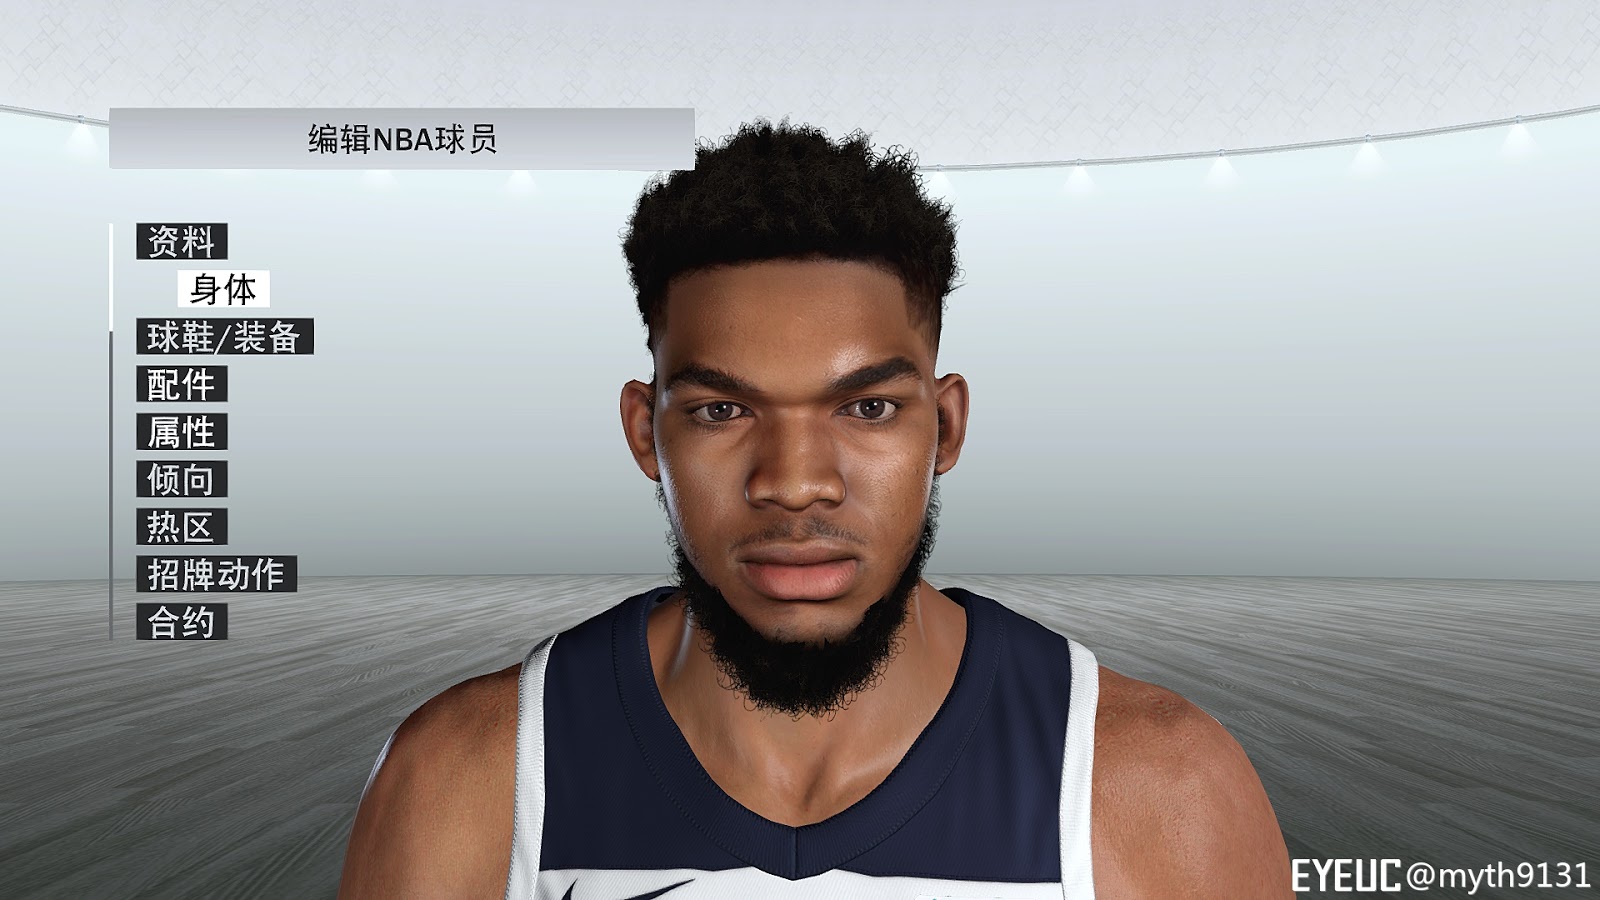 NBA 2K19 - Karl Anthony Towns Cyberface by myth25 - Shuajota | Your Videogame to the ...1600 x 900